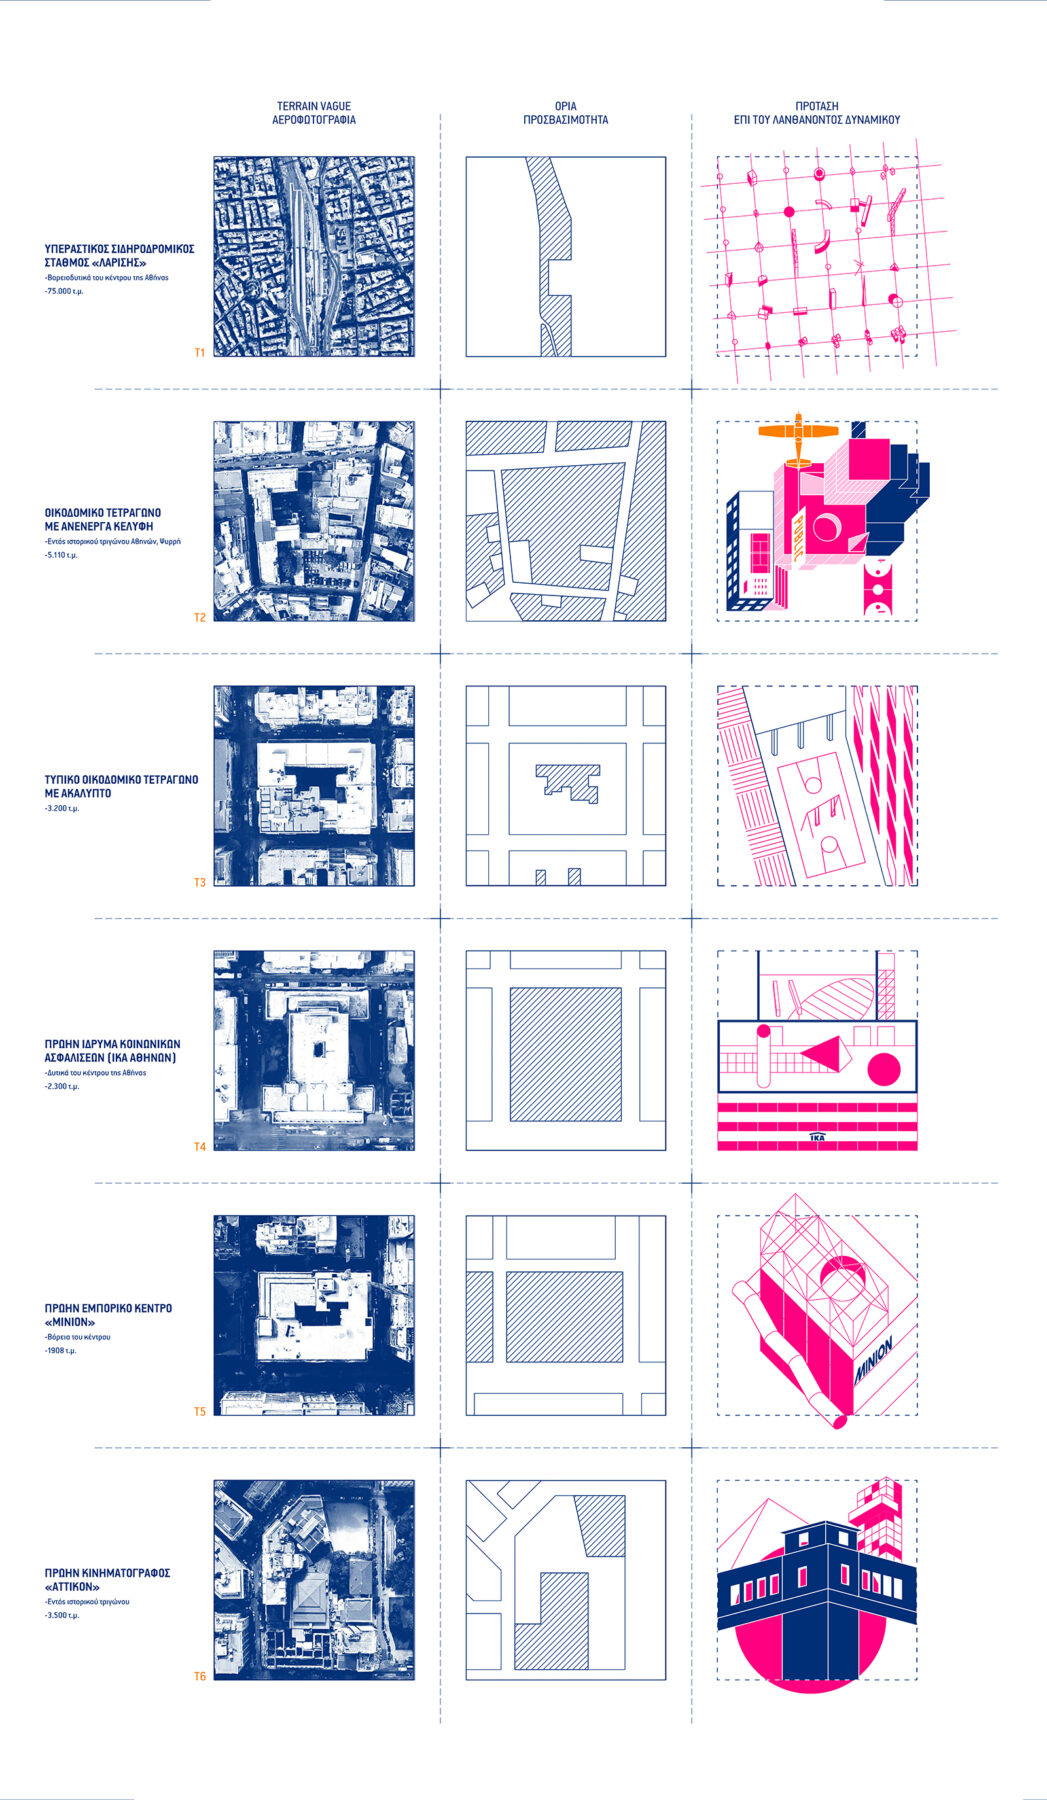 Archisearch A Story of Congestion | Diploma thesis by I. Georgaklis, E. Stampelos & A. Chouliaras